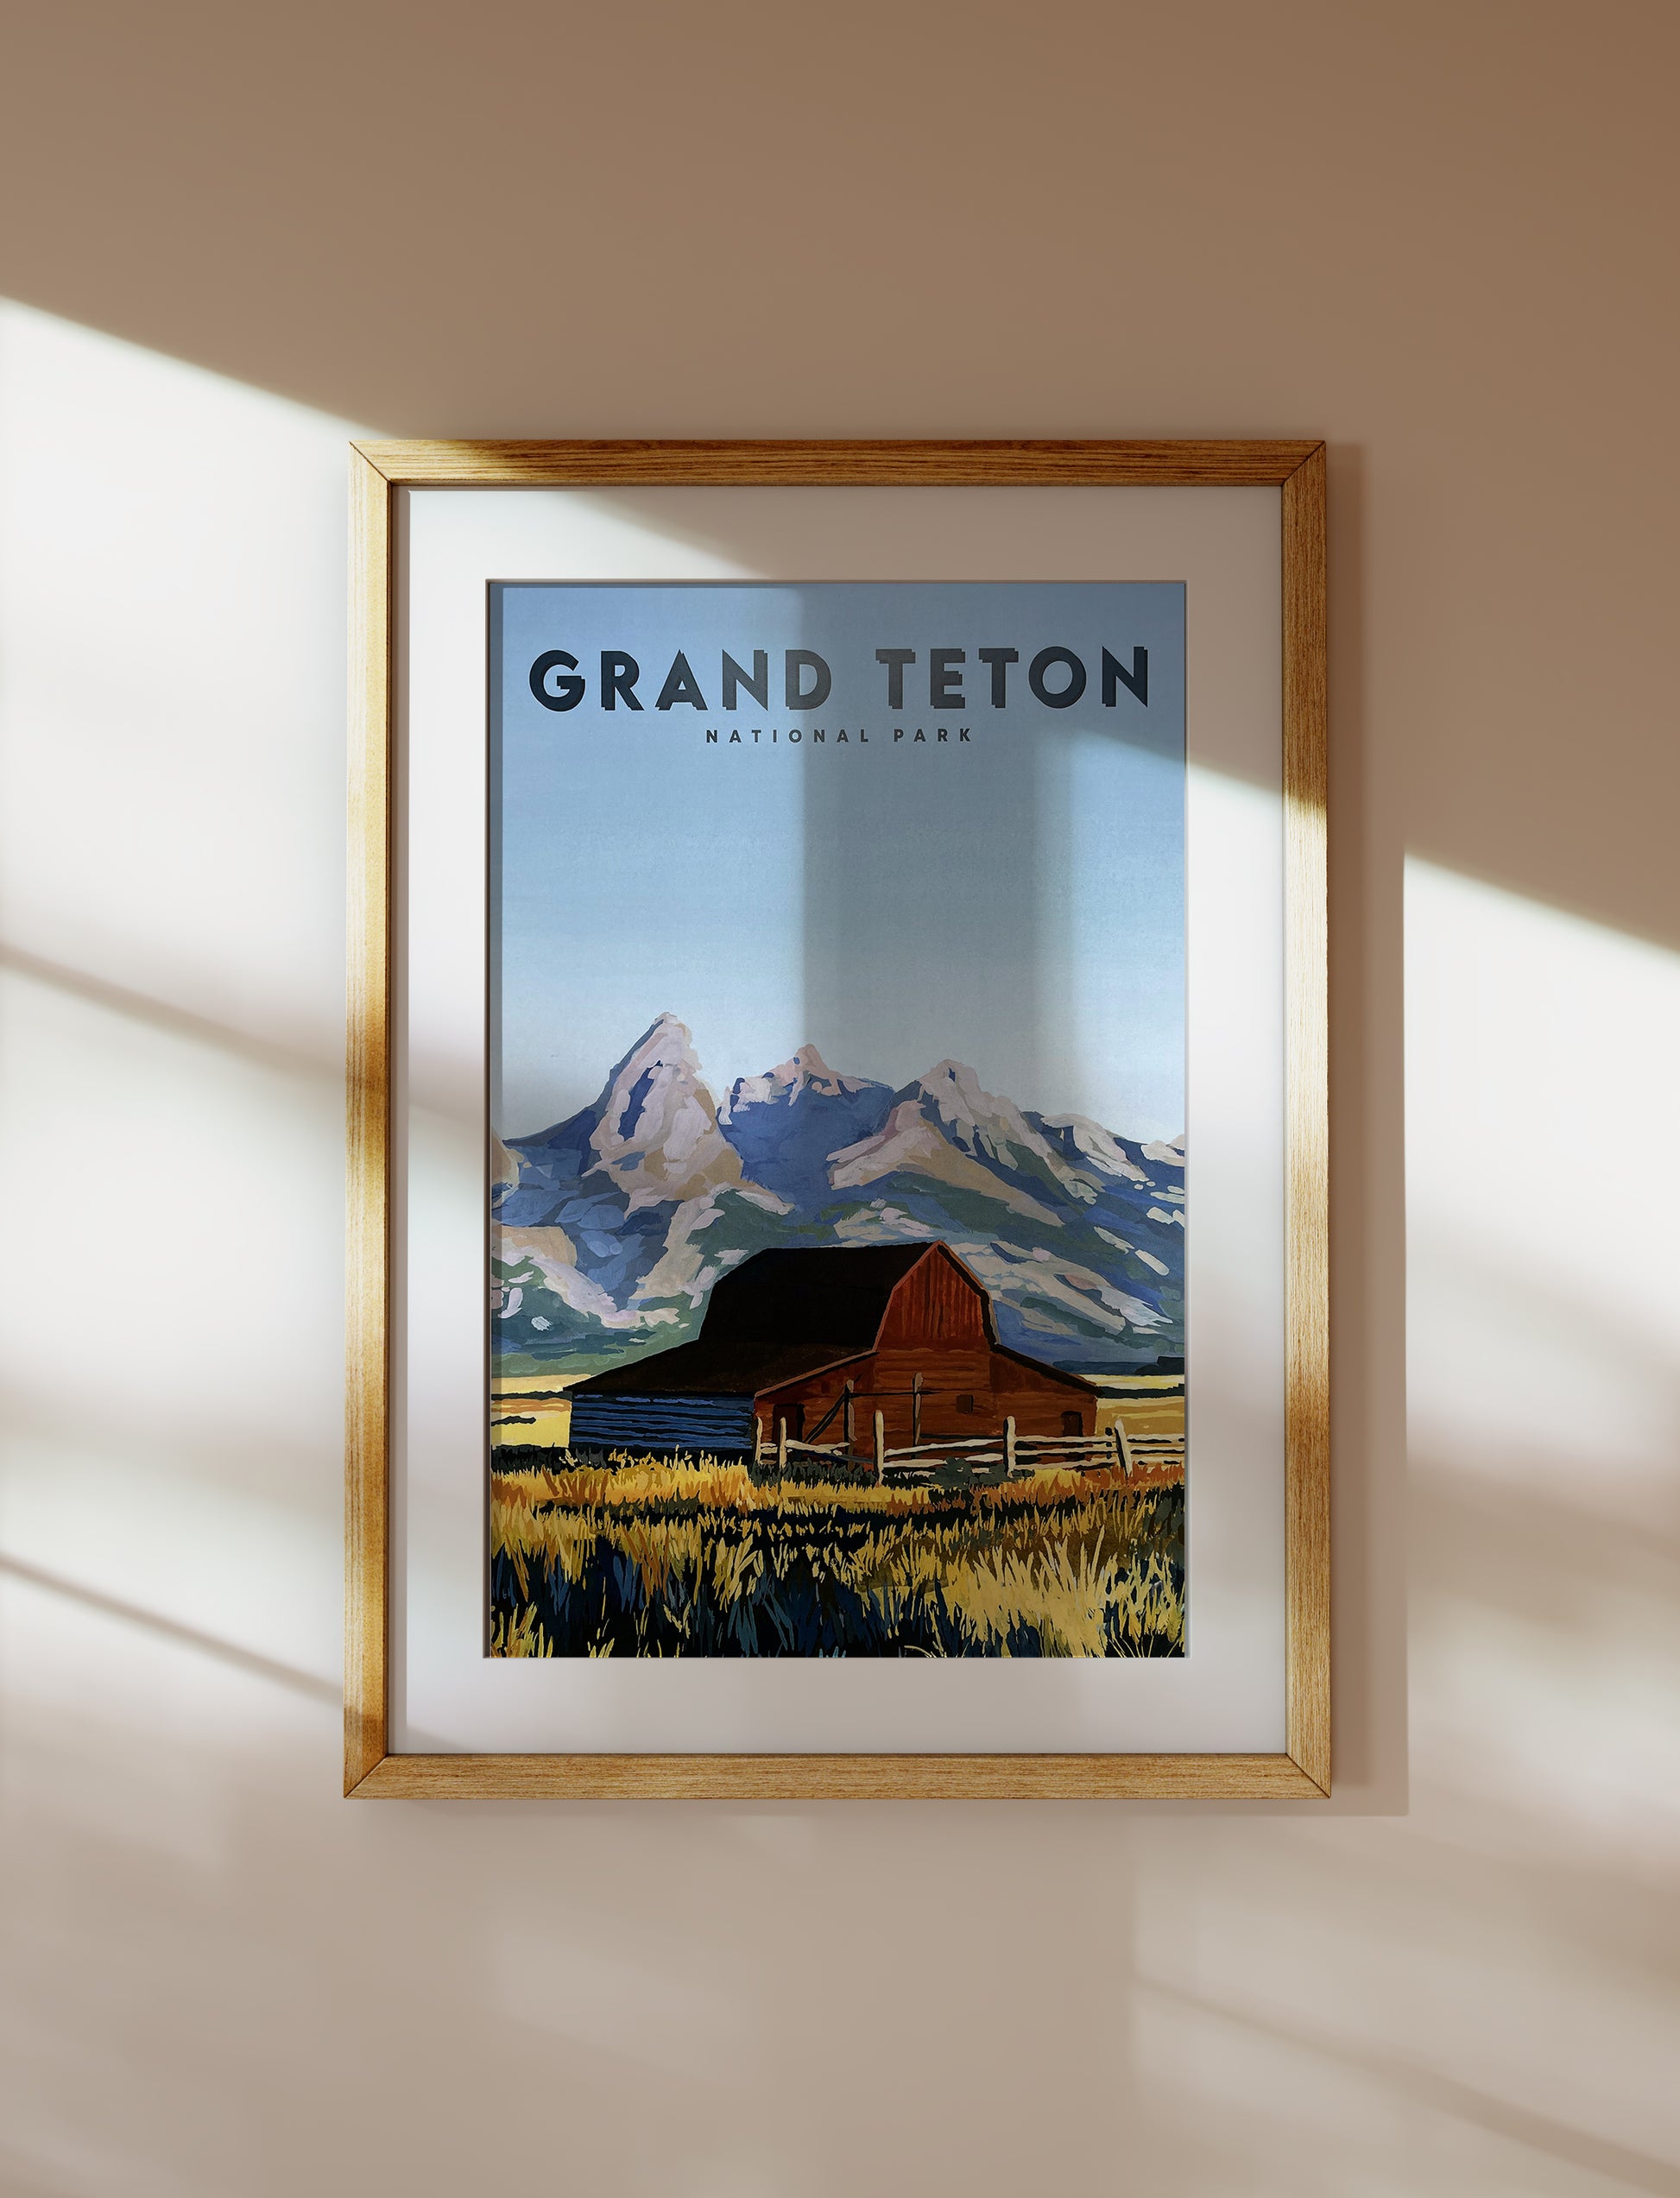 Framed Travel Poster of Grand Teton National Park. Background image of travel poster features landscape painting of T.A. Moulton Barn